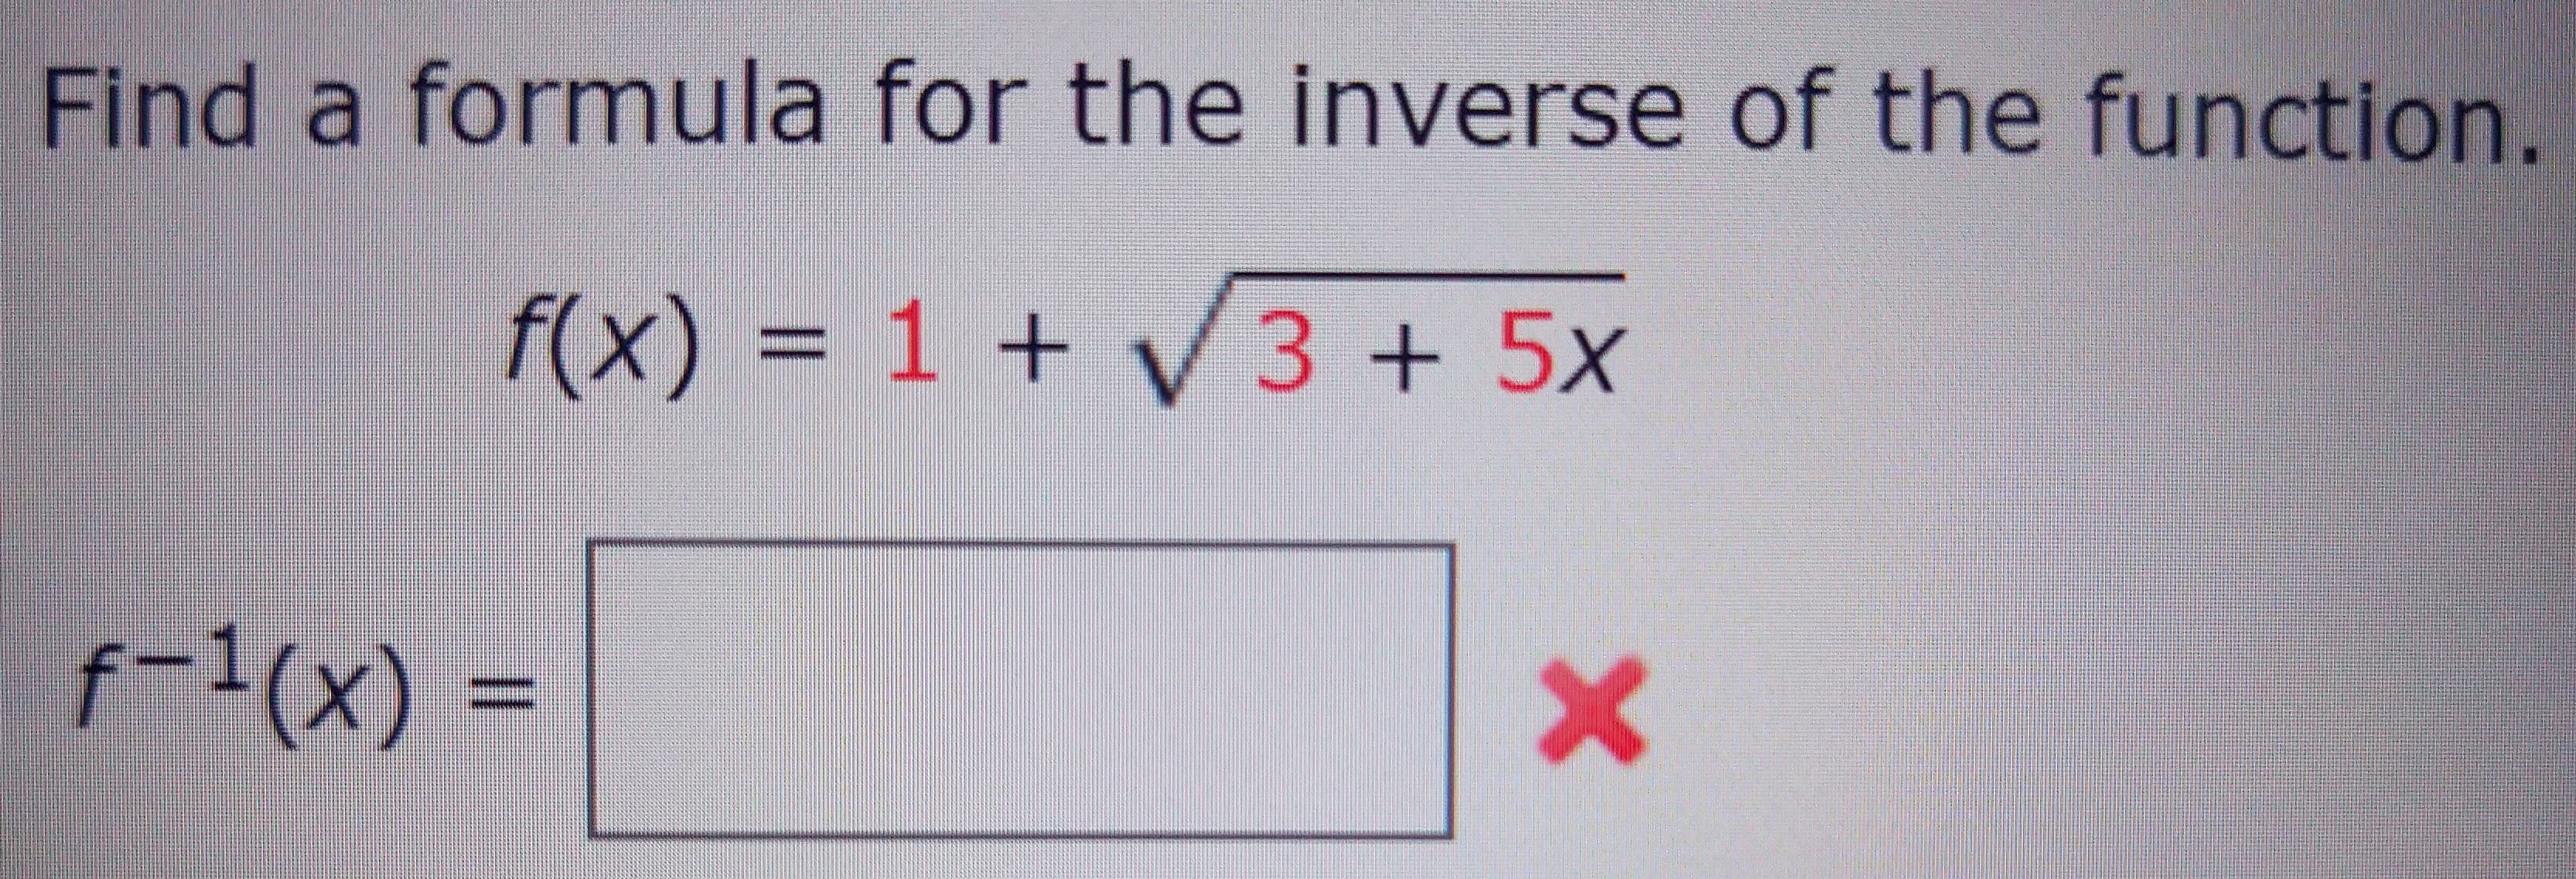 Find a formula for the inverse of the function.
f(x) 1 + V 3+ 5x
f-1(x)
X
